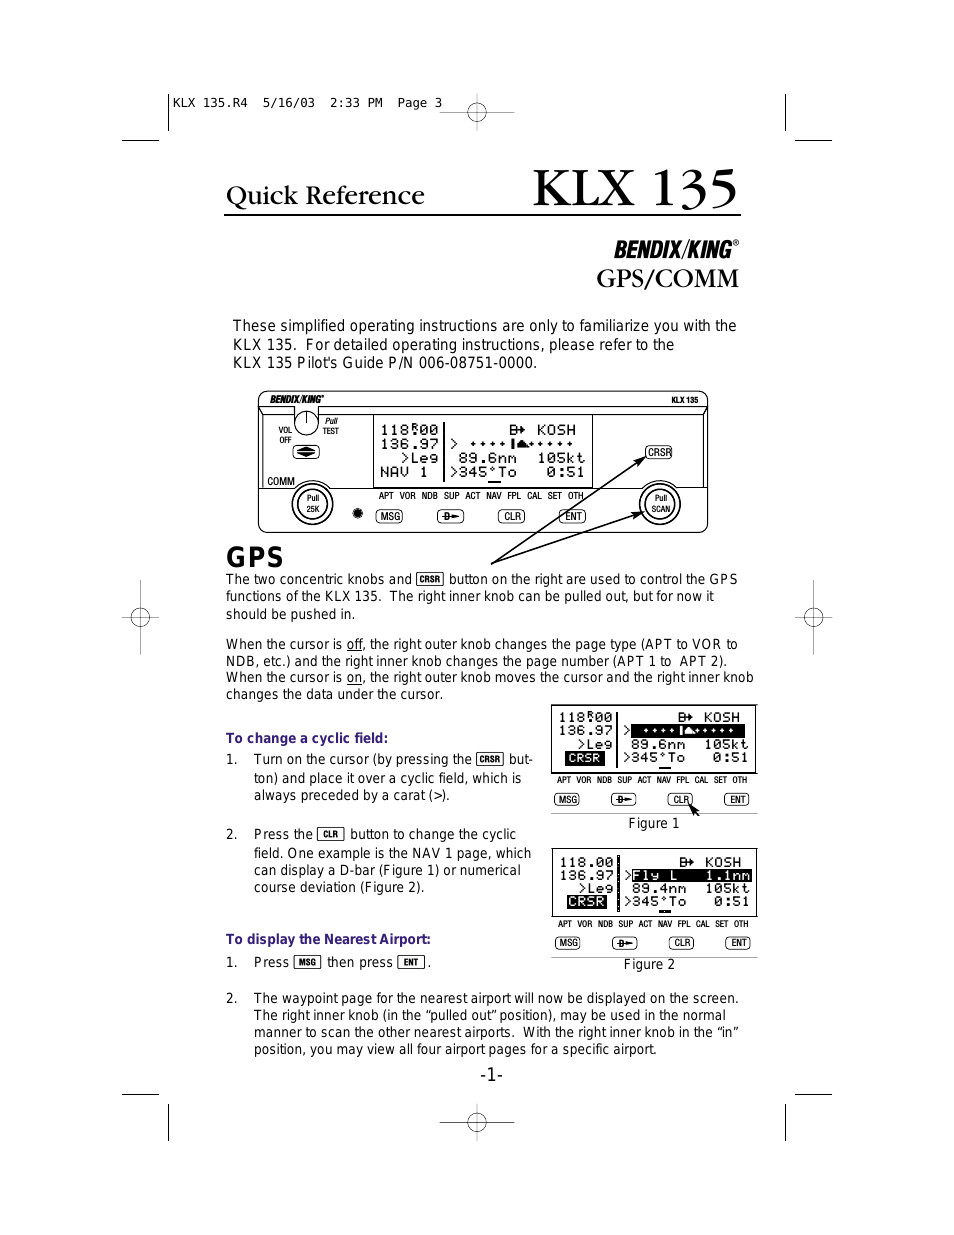 KLX 135 - Quick Reference Guide